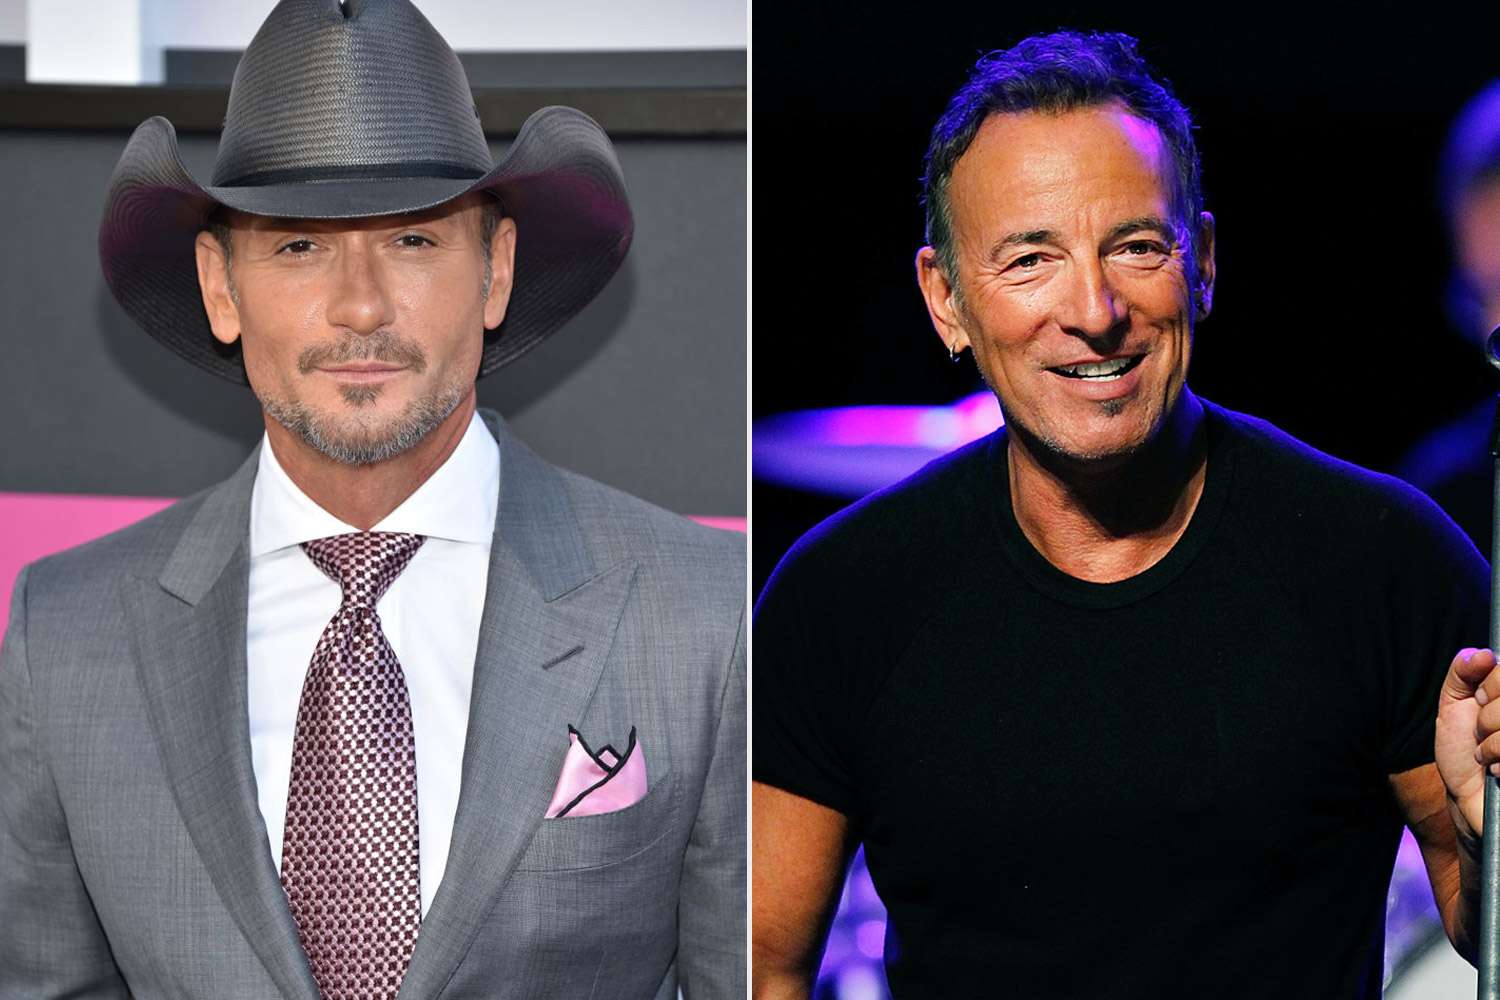 Tim McGraw and Bruce Springsteen